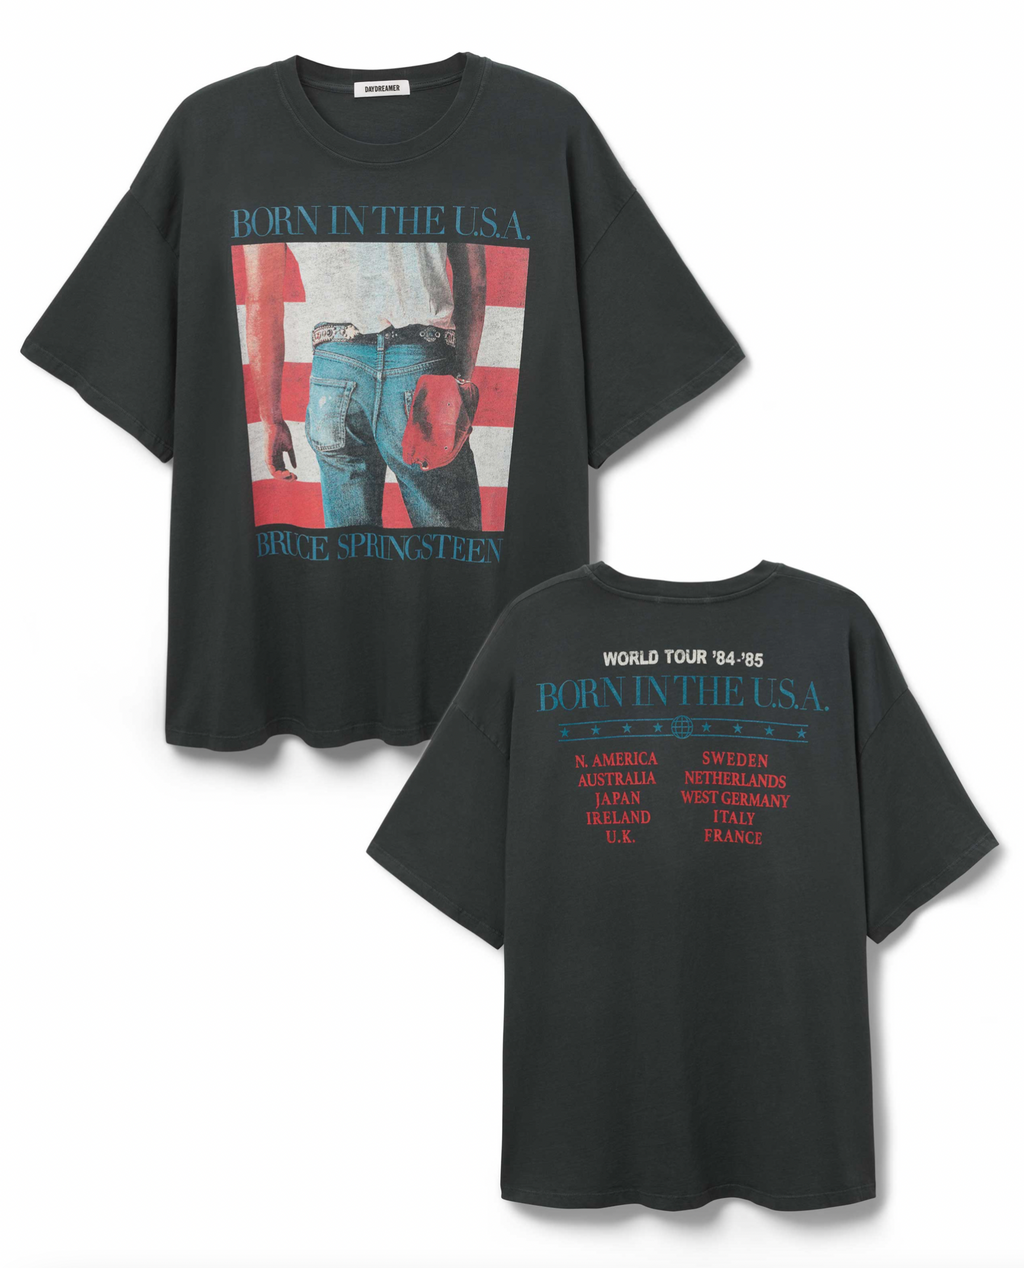 Bruce Springsteen One Size Tee